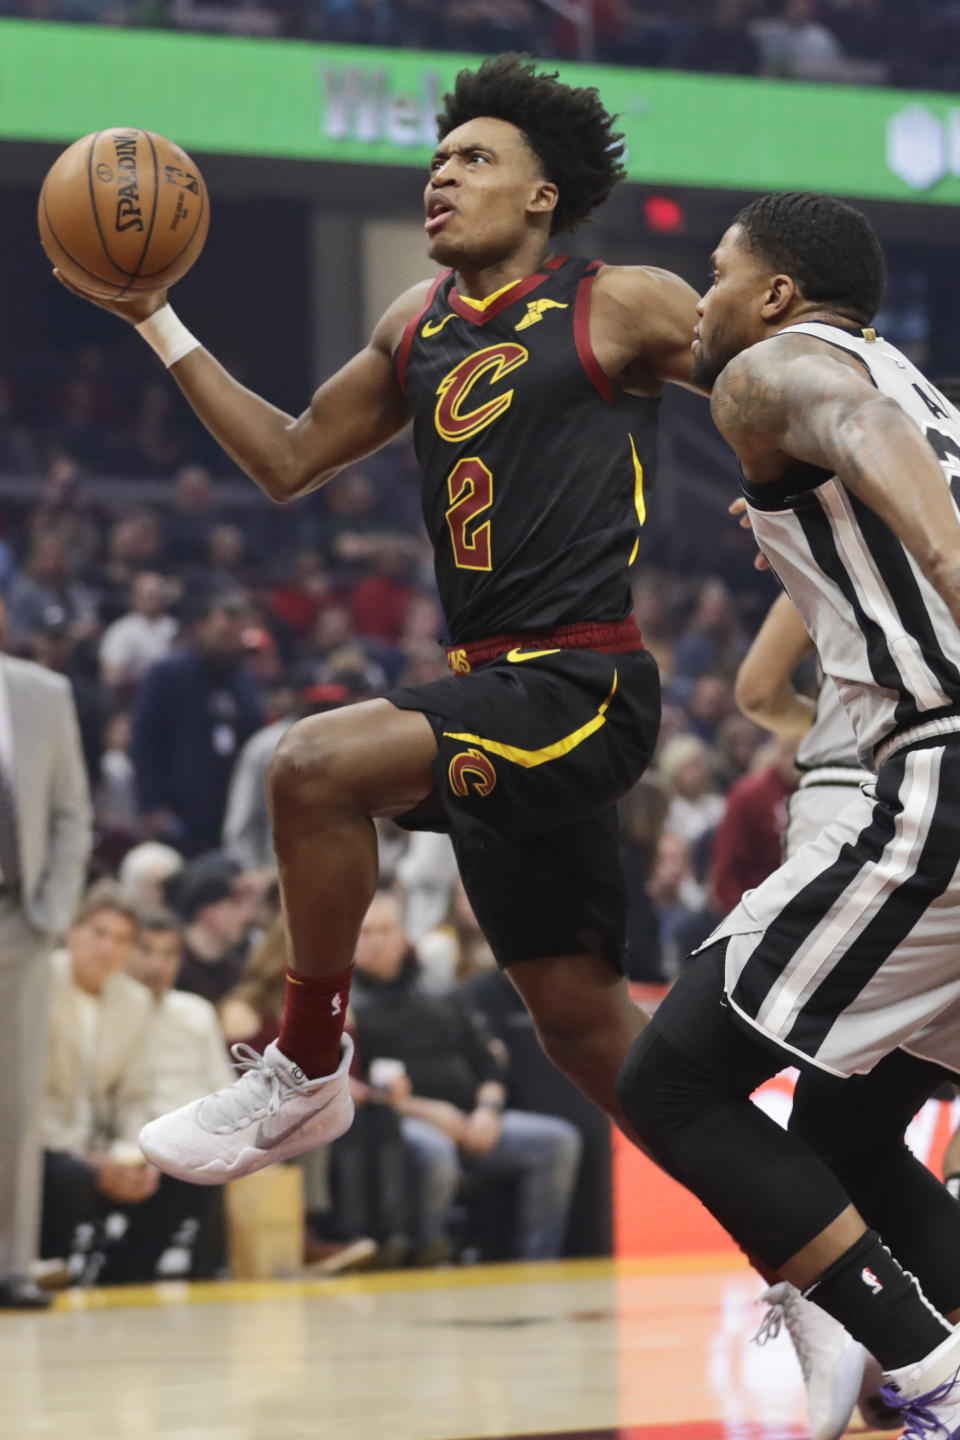 Cleveland Cavaliers' Collin Sexton, left, drives against San Antonio Spurs' Rudy Gay in the first half of an NBA basketball game, Sunday, March 8, 2020, in Cleveland. (AP Photo/Tony Dejak)